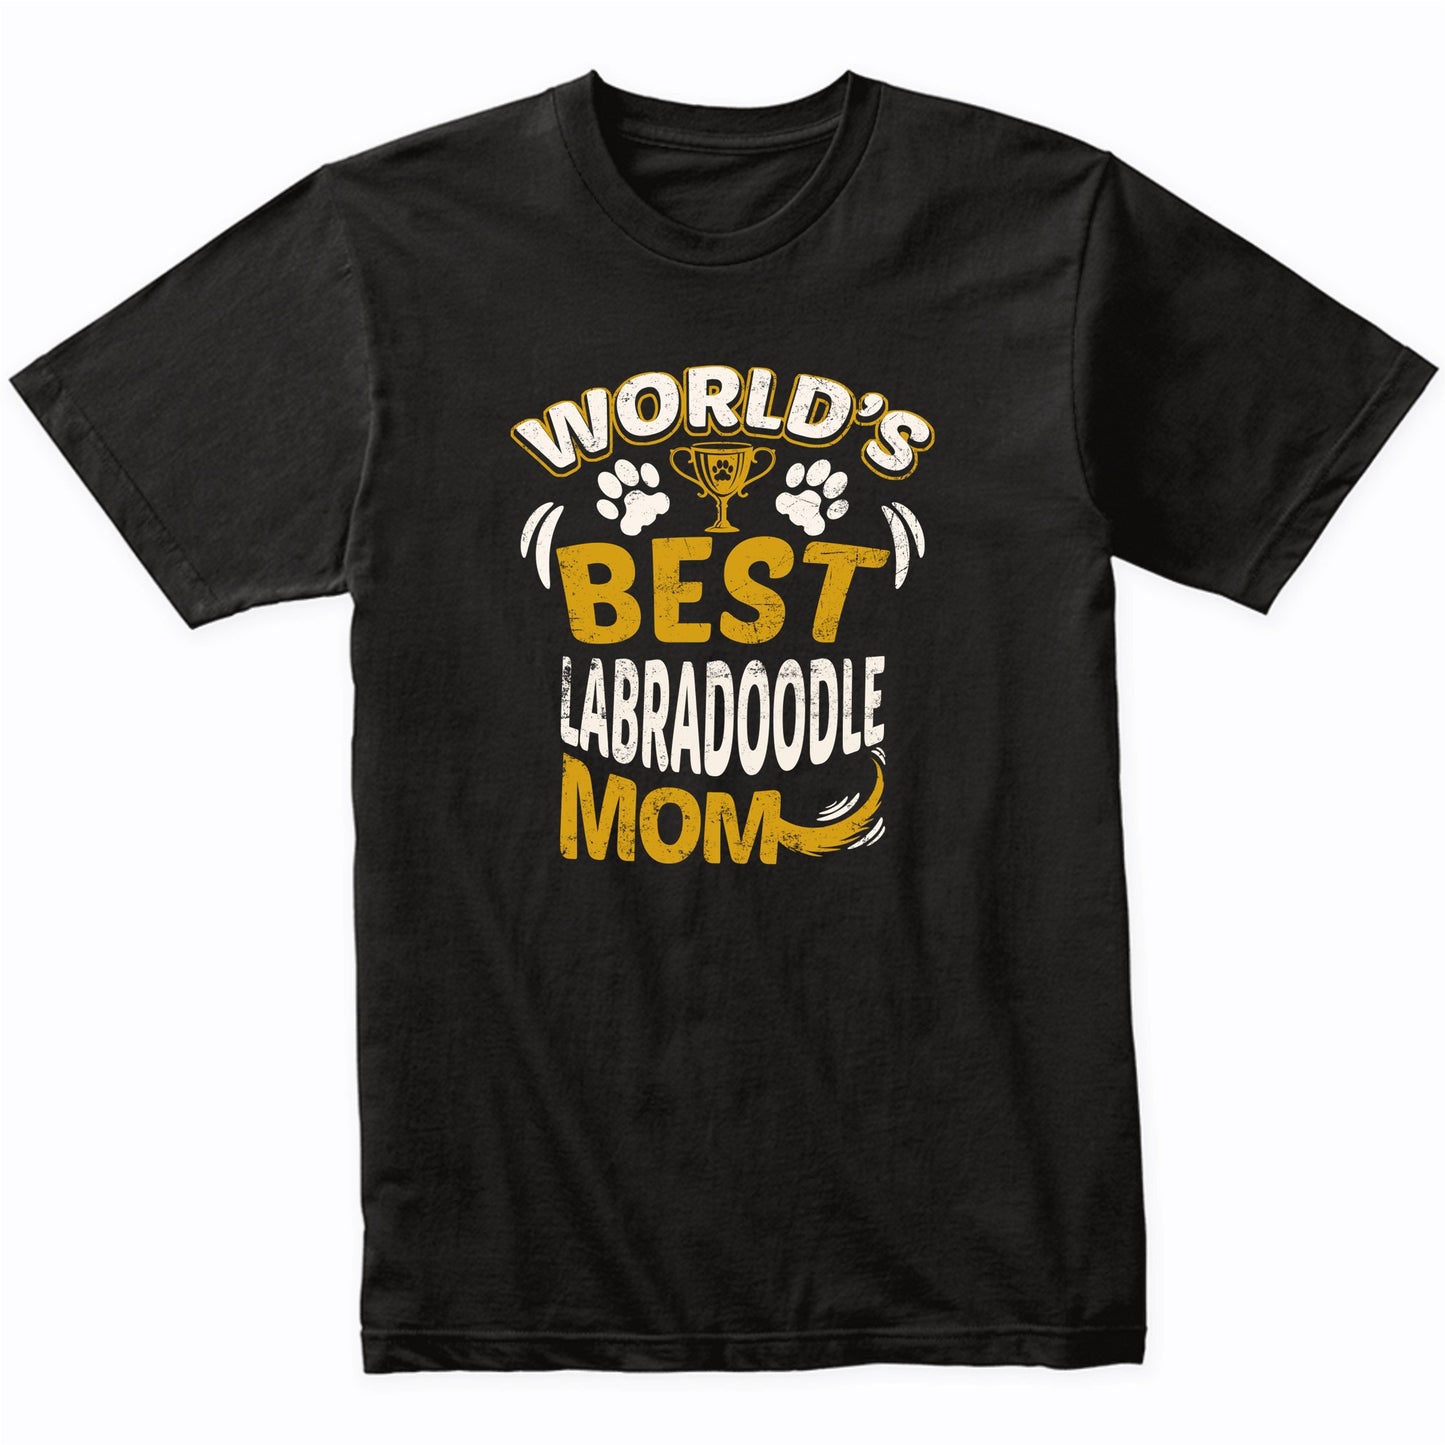 World's Best Labradoodle Mom Graphic T-Shirt